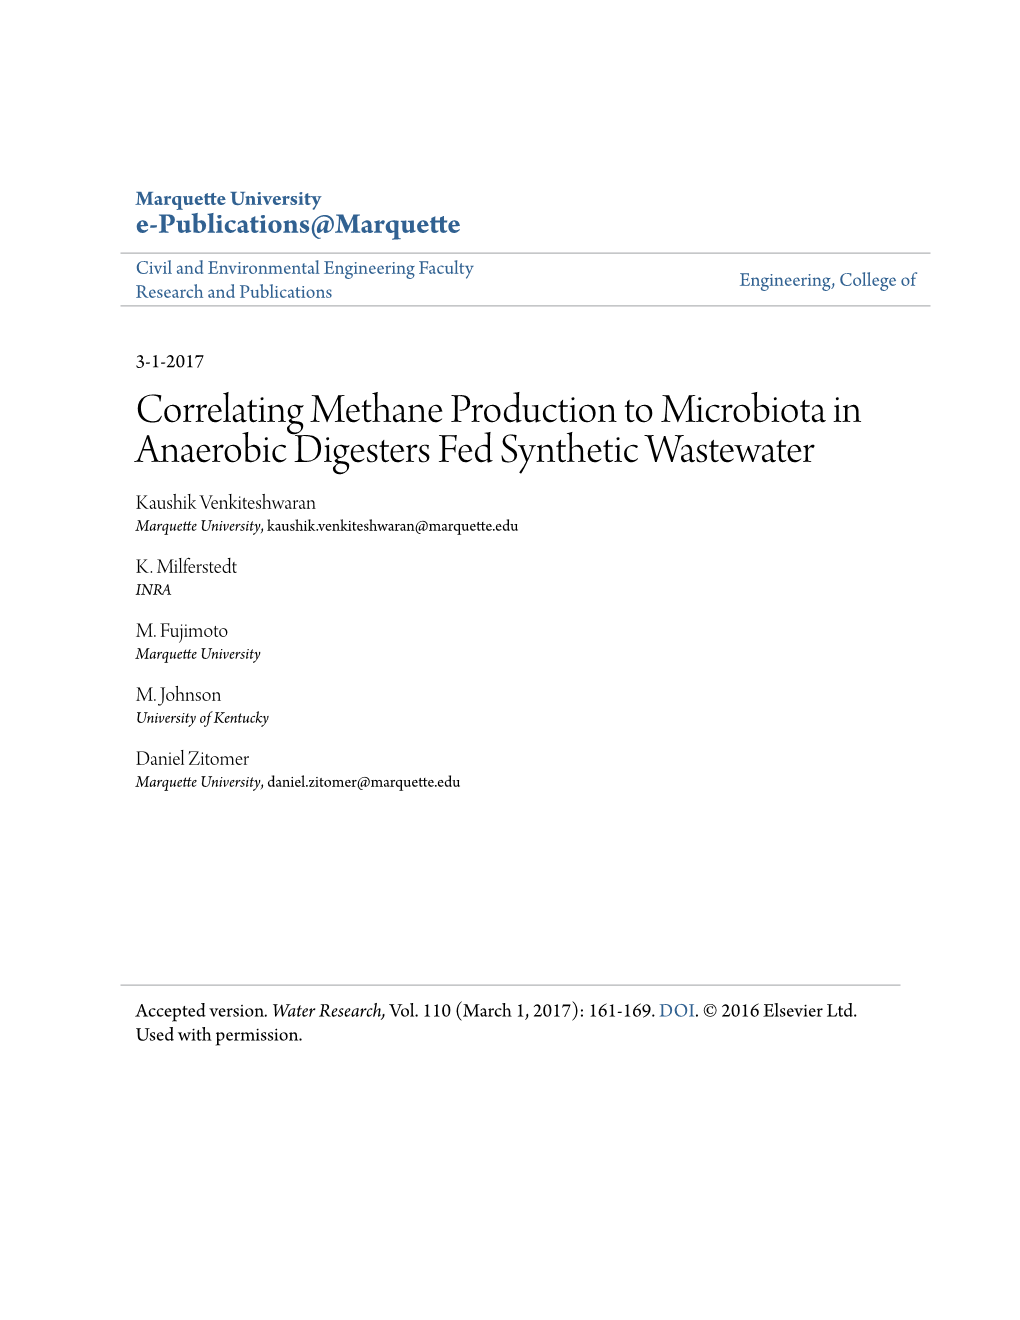 Correlating Methane Production to Microbiota in Anaerobic Digesters